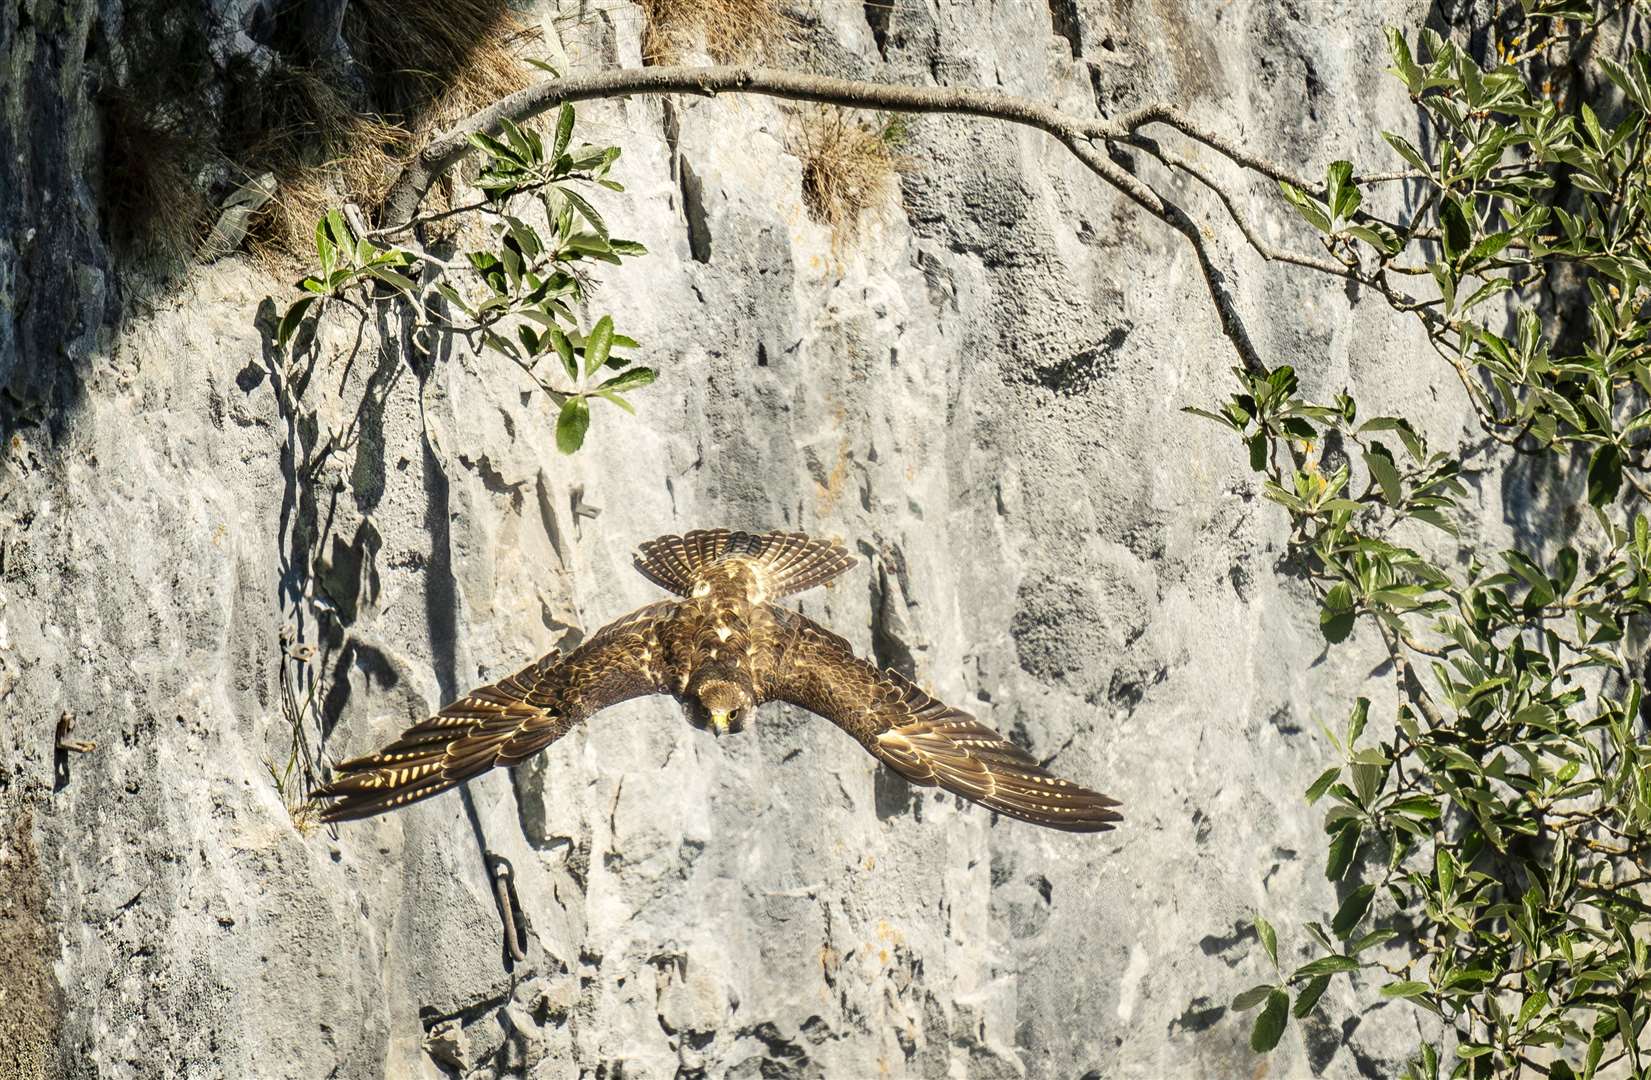 Peregrine falcons set off false alarms to make prey easier to catch, according to a study (Danny Lawson/PA)